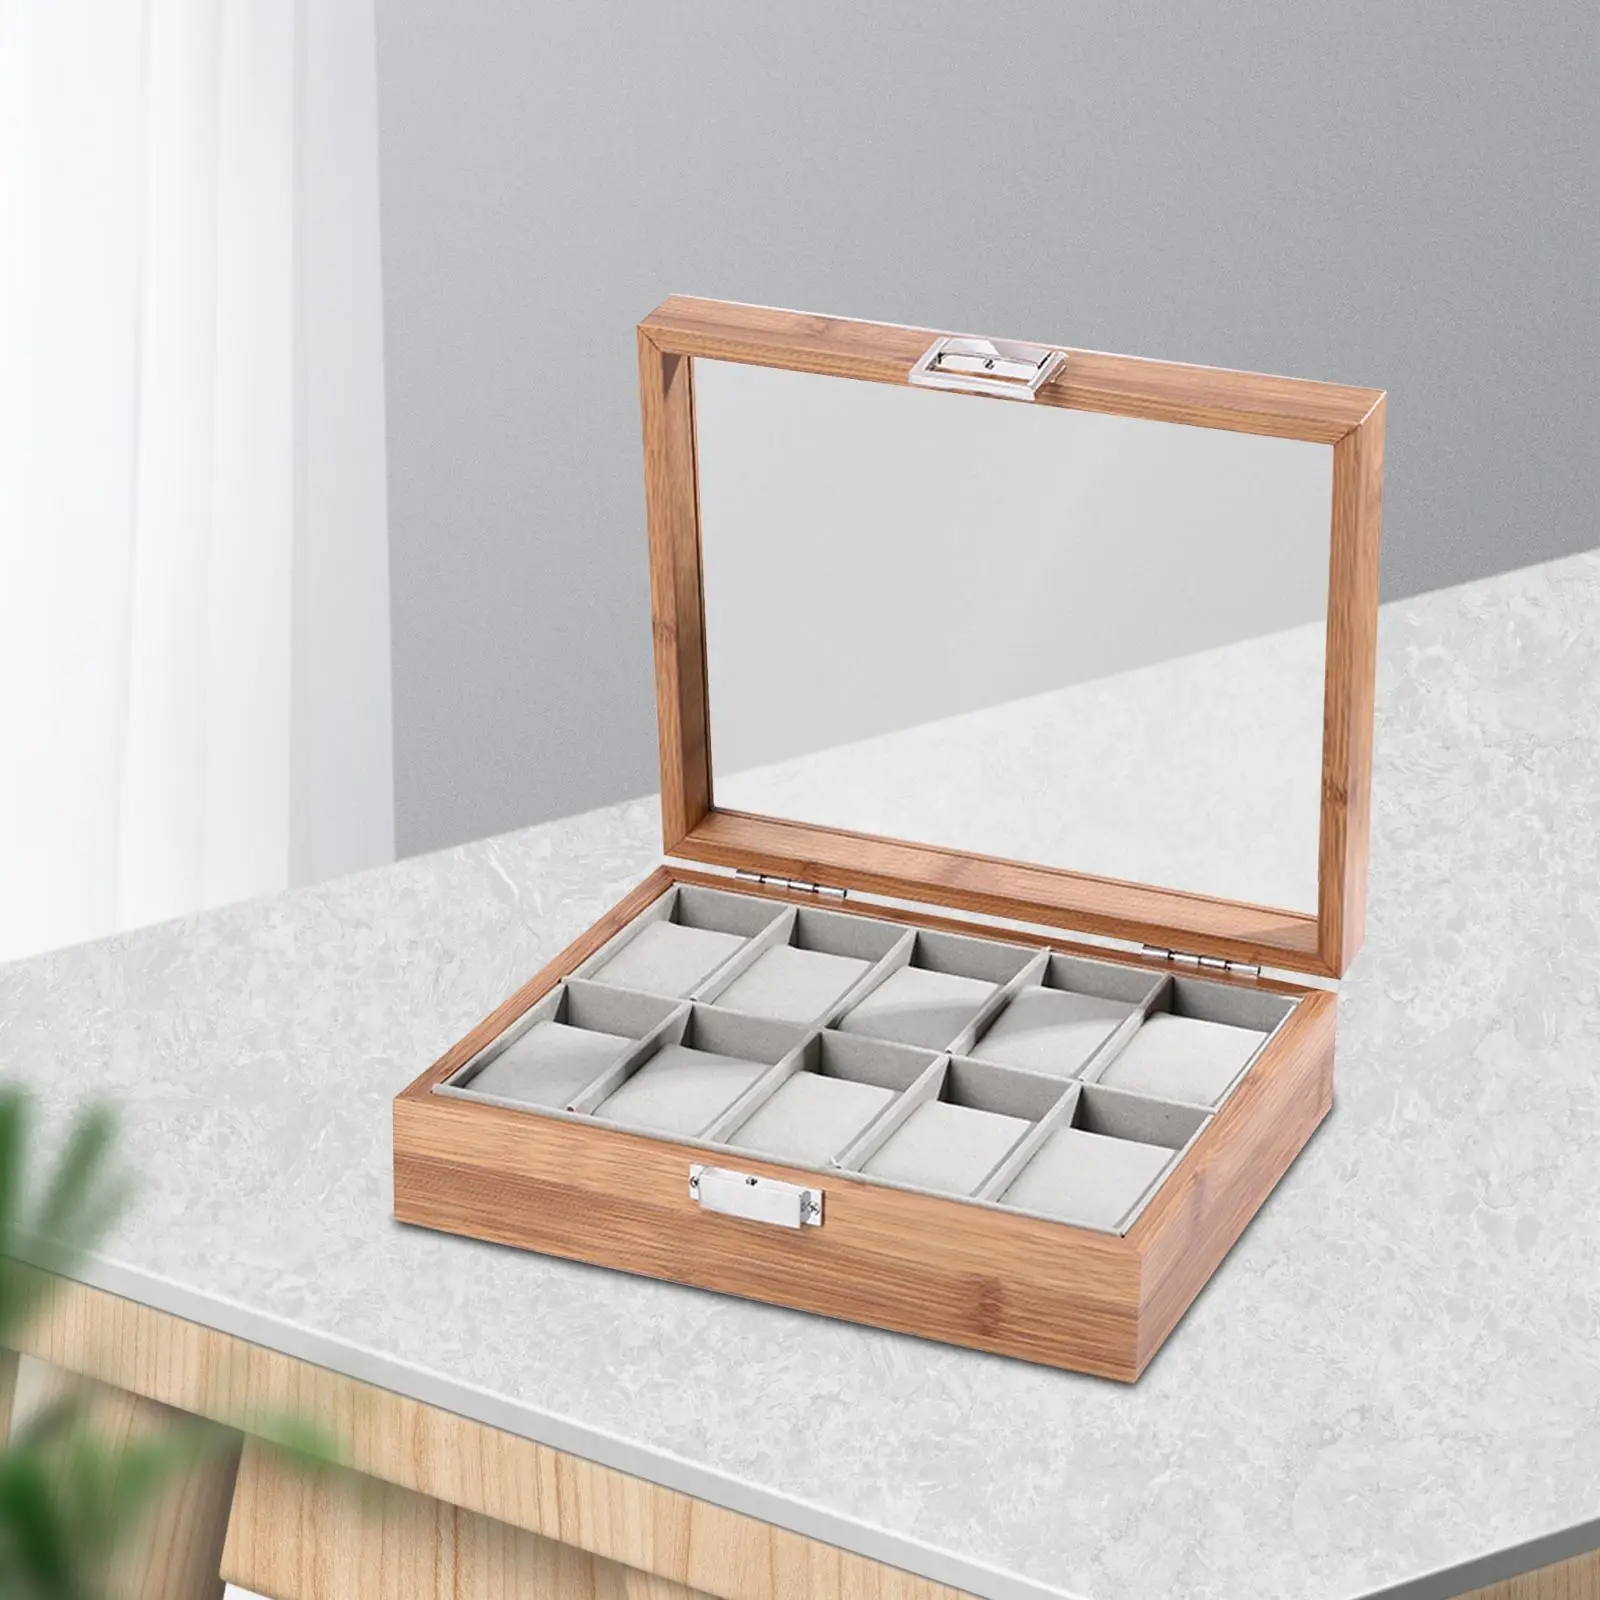 Watch Storage Box Wooden Watches Box Jewelry Display Case for Men and Women Watches Necklace Bracelet Earrings Home Decoration